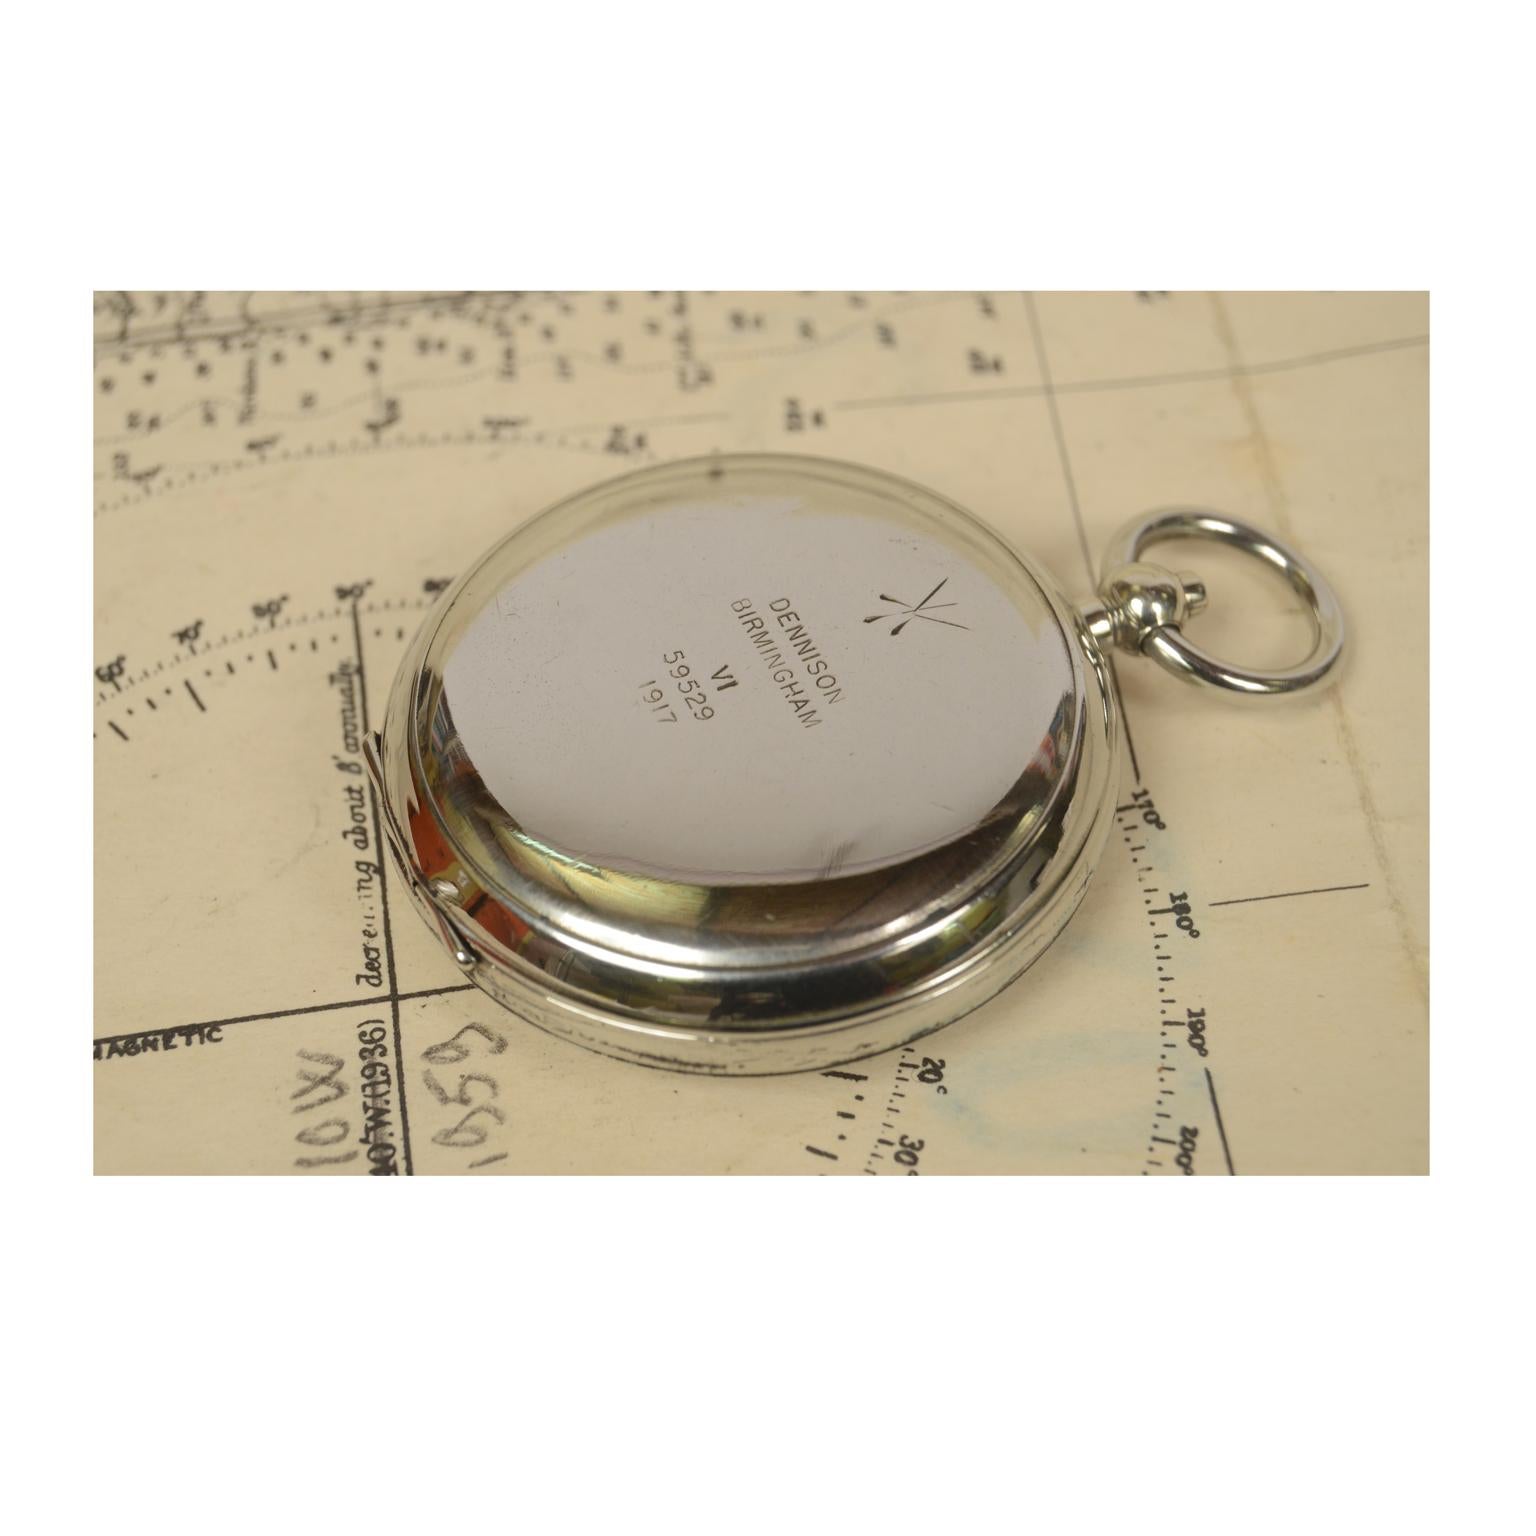 Brass Pocket Compass Used by British Aviation Officers, 1917